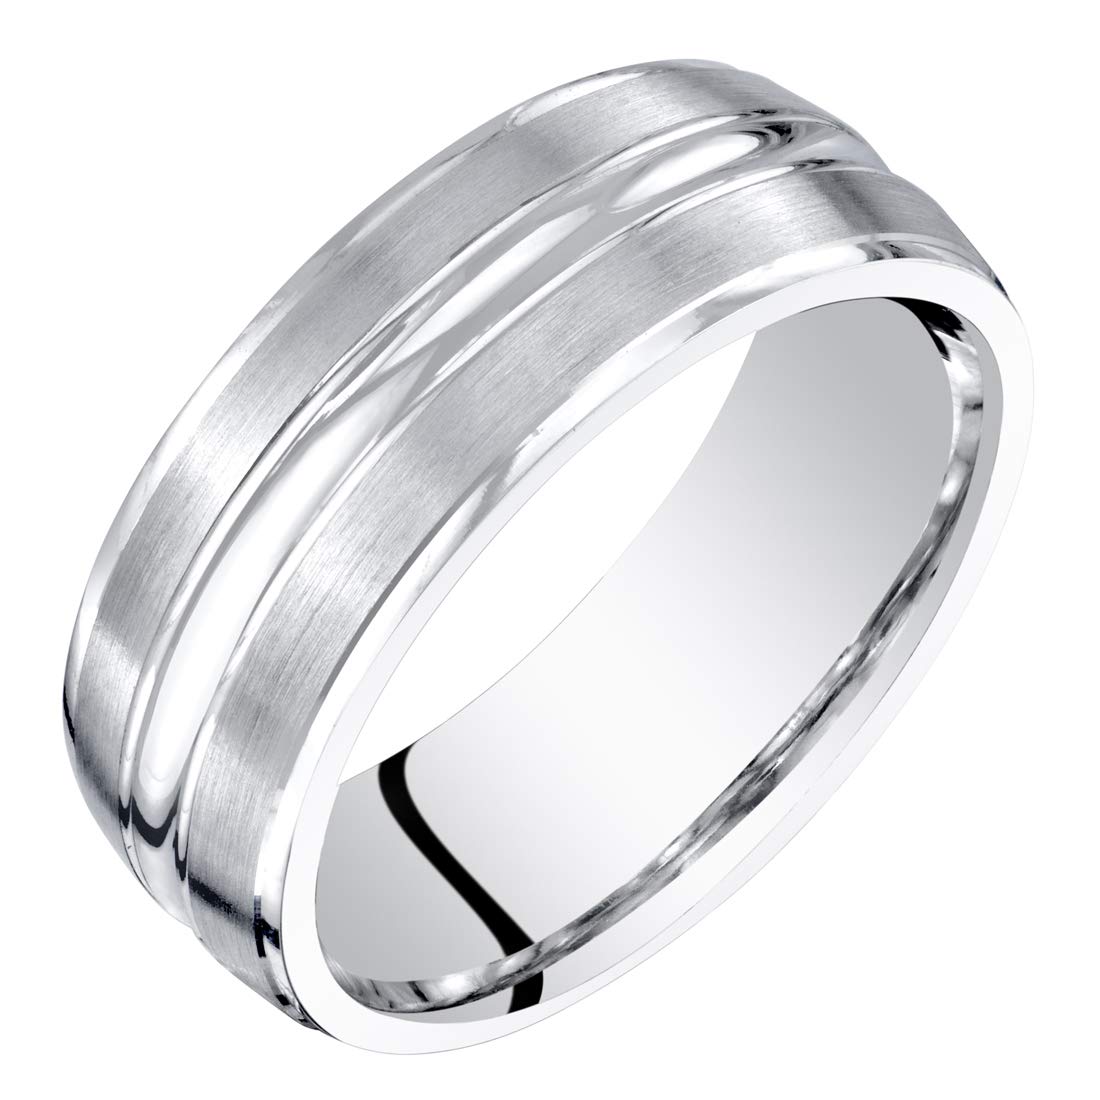 Peora Men's 7mm 14K White Gold Wedding Ring Band, Brushed Matte with Polished Grooves, Comfort Fit Sizes 8 to 16